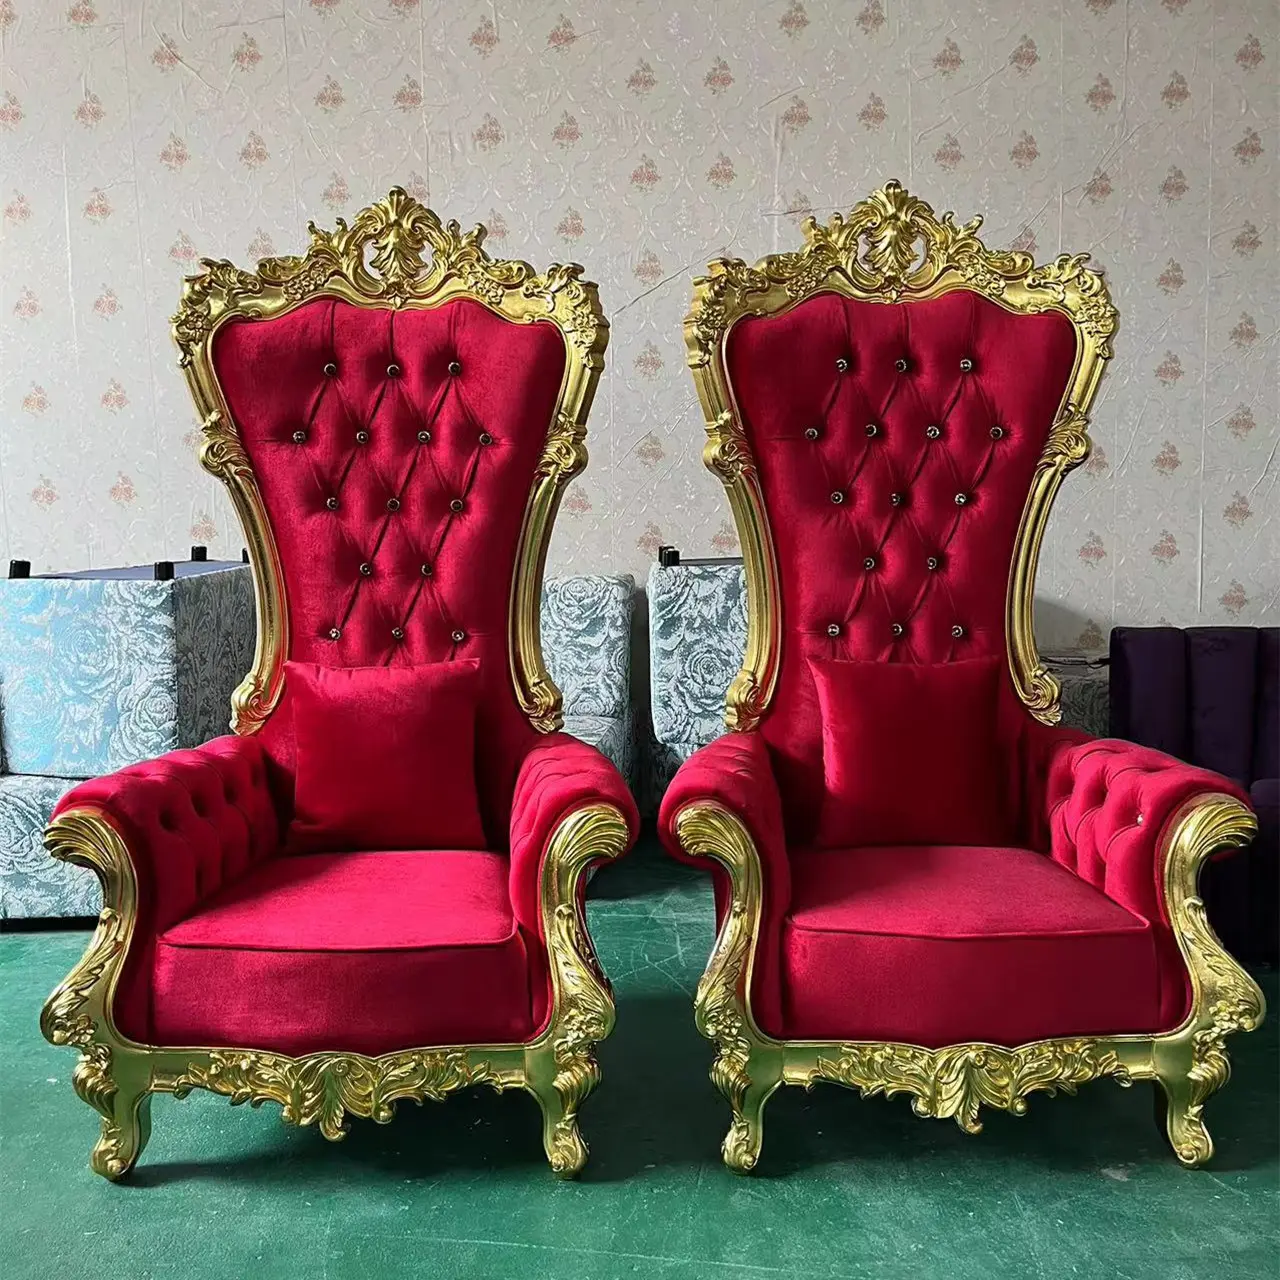 wholesale high back wood wedding chair,gold and white royal chairs luxury wedding king gold throne chairs wedding